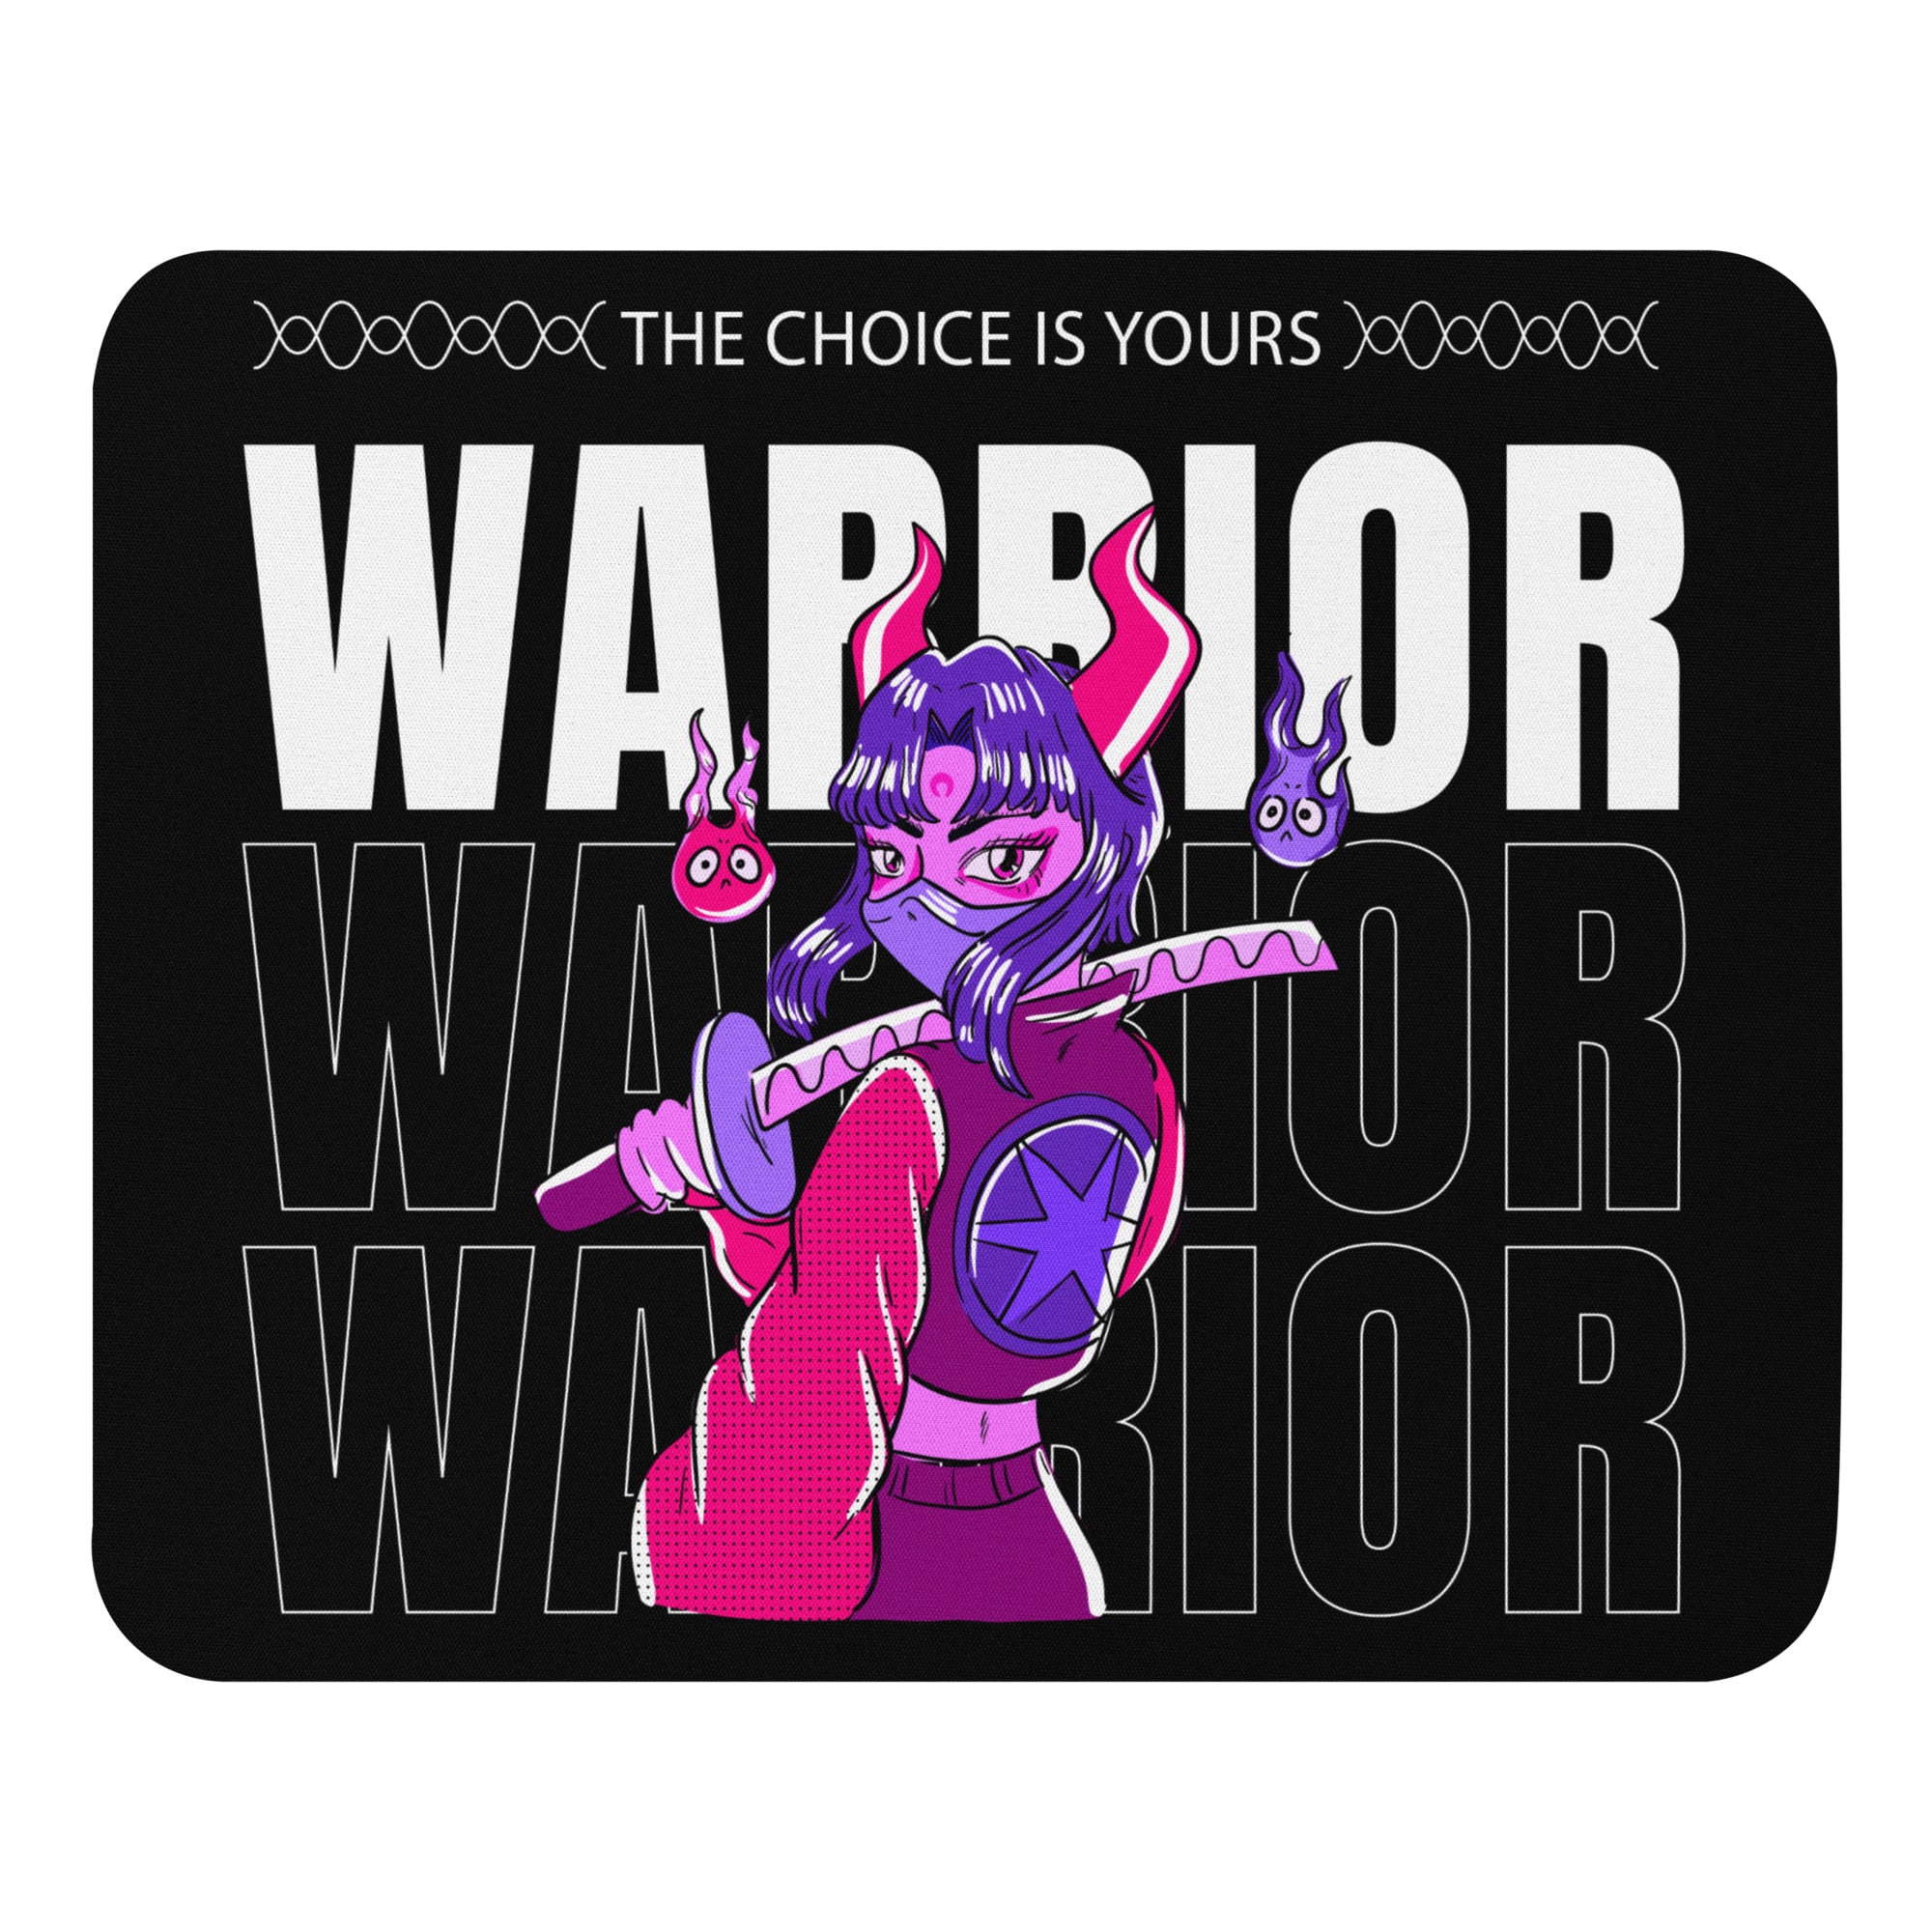 Gaming Warrior Mouse Pad Warrior-themed mouse pad Gaming mouse pad Warrior design mouse pad Custom gaming mouse pad Large gaming mouse pad Anti-slip gaming mouse pad High-performance gaming mouse pad Ergonomic gaming mouse pad Warrior mouse pad for gamers Gaming accessories: warrior mouse pad Video game store Gaming merchandise Gaming accessories shop Online gaming store Video game shop near me Gaming console store PC gaming store Gaming gear shop Retro gaming shop Board game shop Anime merchandise Anime store online Japanese anime shop Anime figurines Manga shop Anime DVDs Anime accessories Anime apparel Anime collectibles Anime gifts